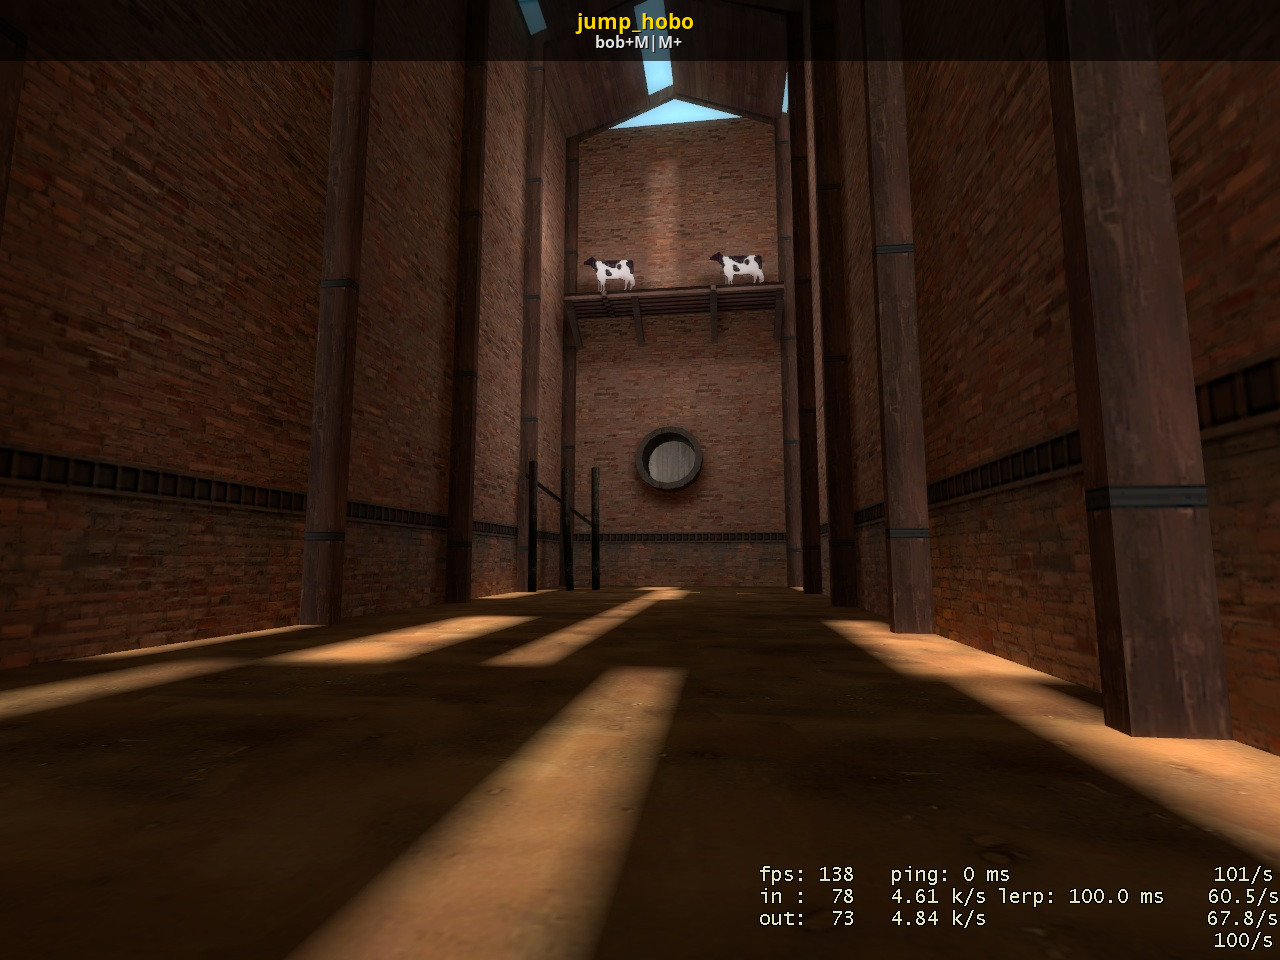 A Team Fortress 2 (TF2) Mod in the Jump category, submitted by bob+M|M+.